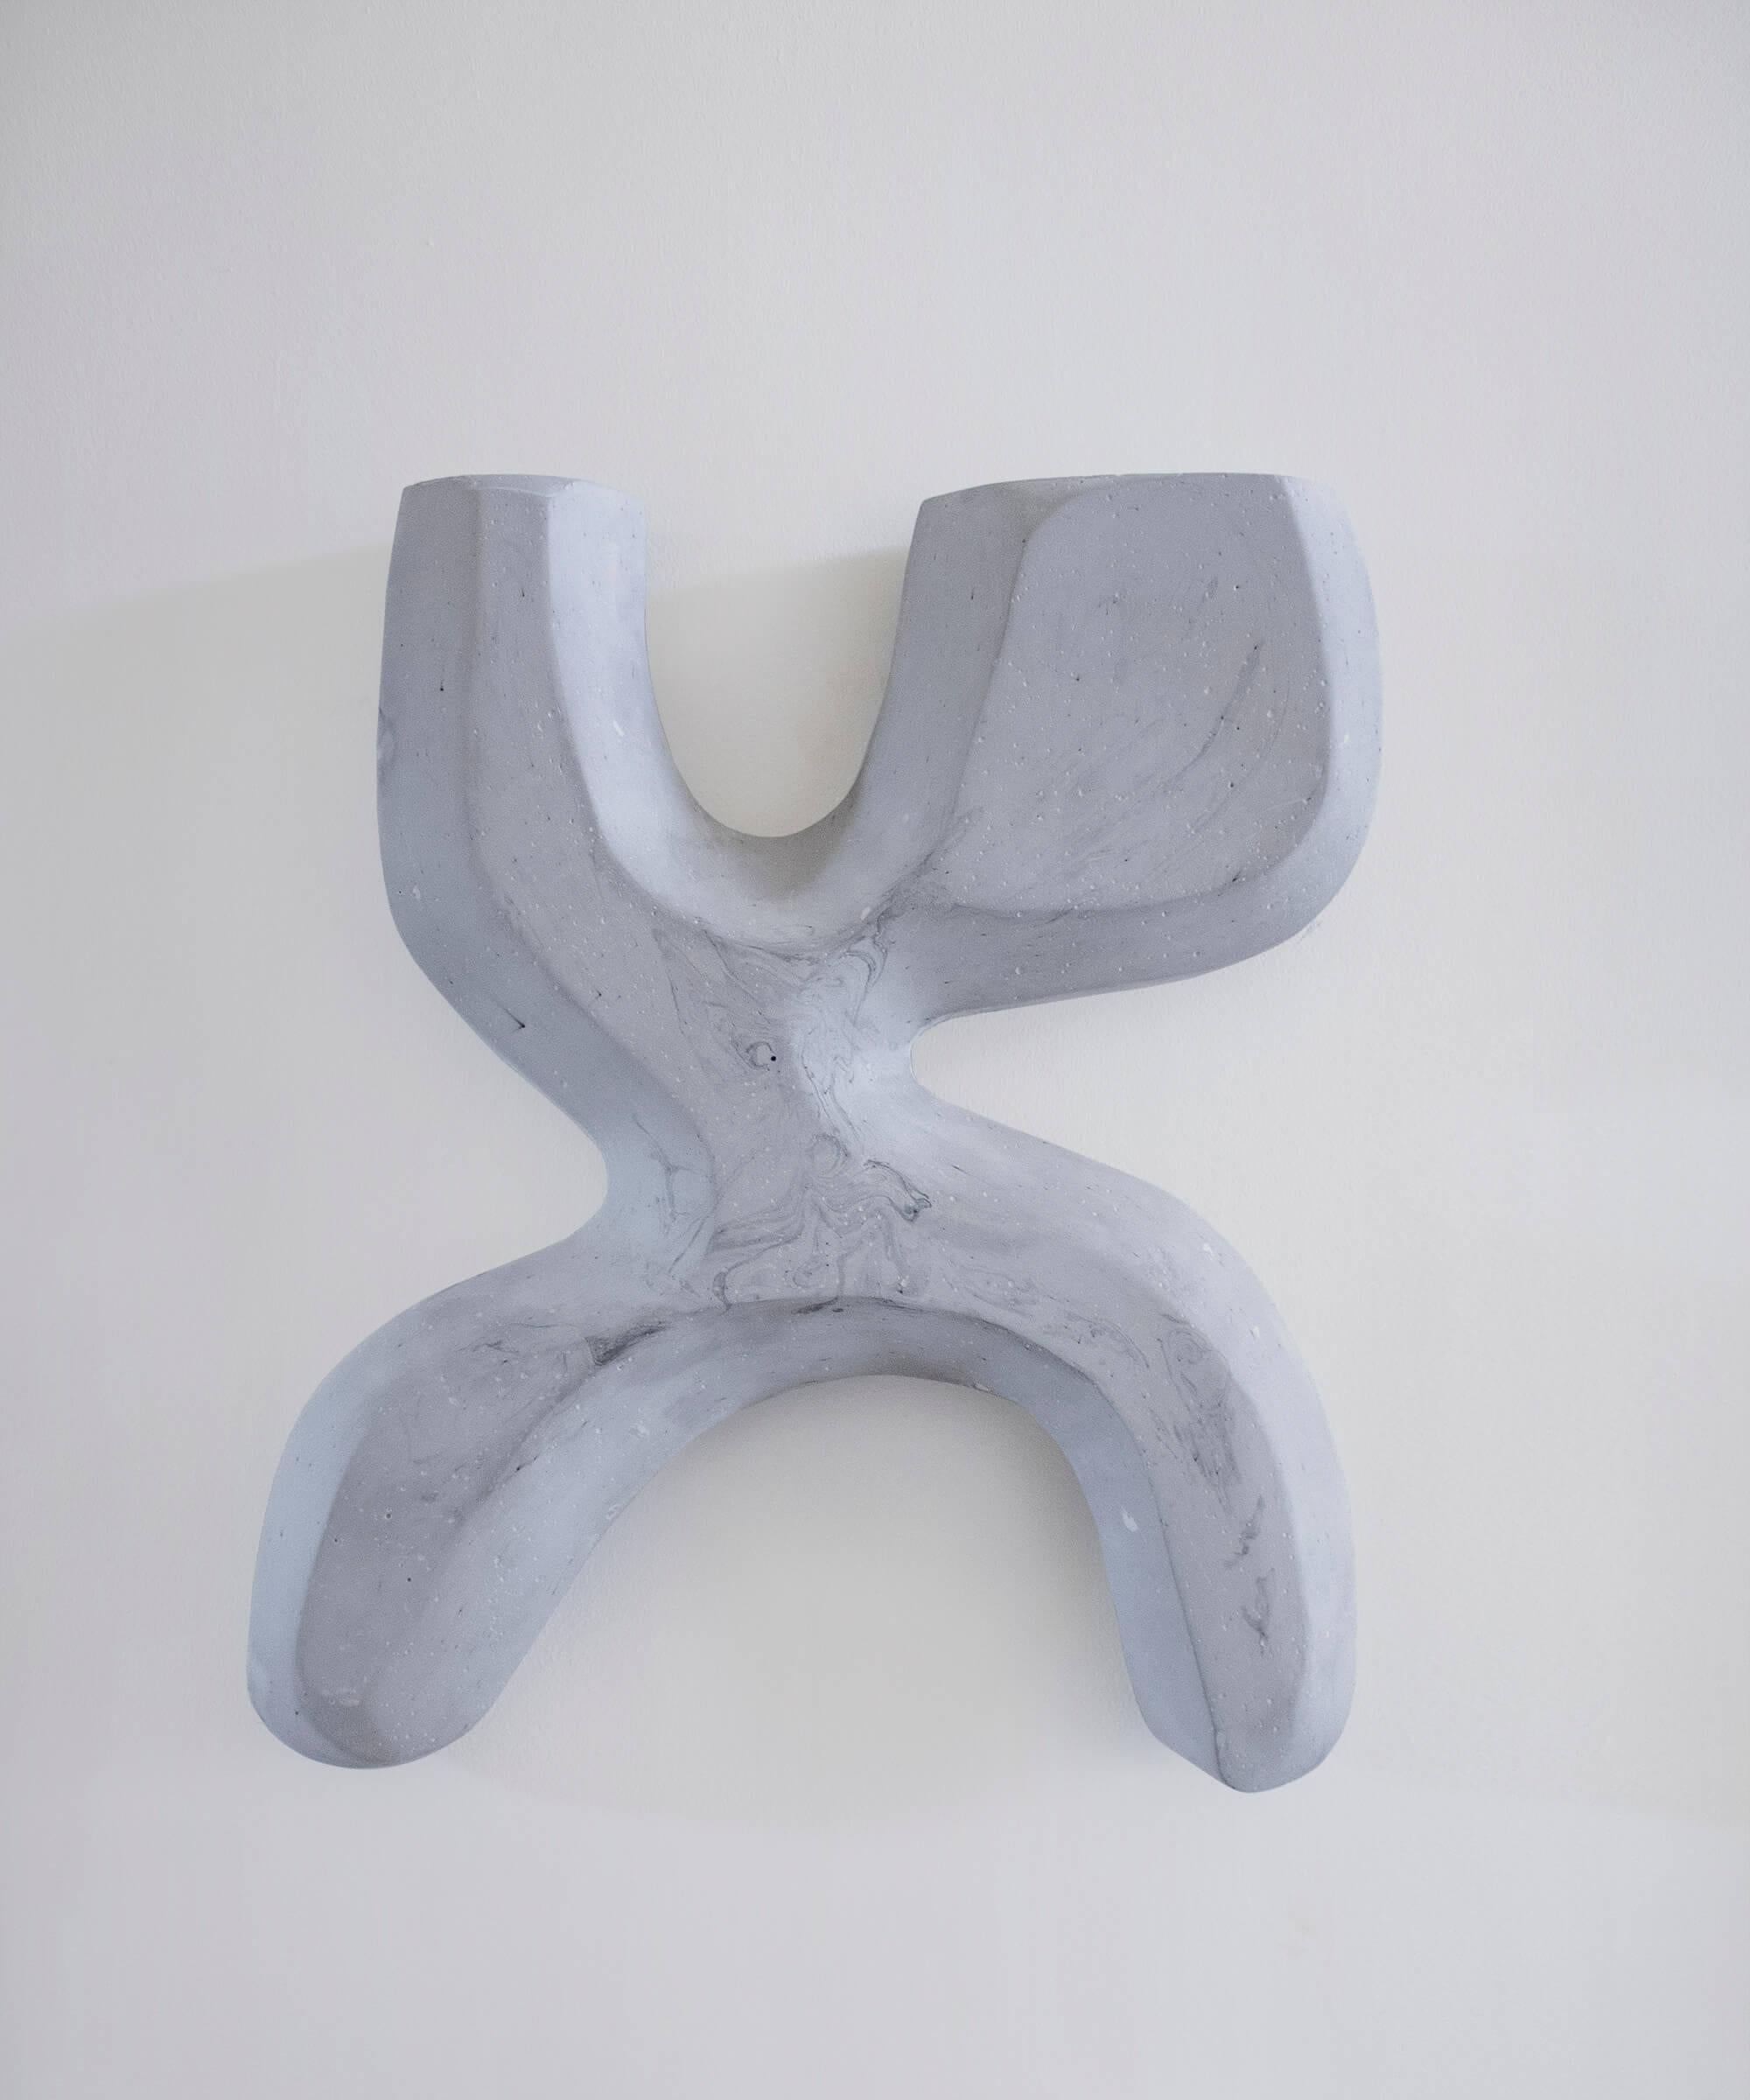 Sculpture form No_003 by AOAO
Dimensions: W 37 x D 6 x H 41 cm
Materials: Grey plaster
Color options available upon request.

The idea was born after deciding to reconnect with my family and my grandfather – a sculptor artist. Learning to